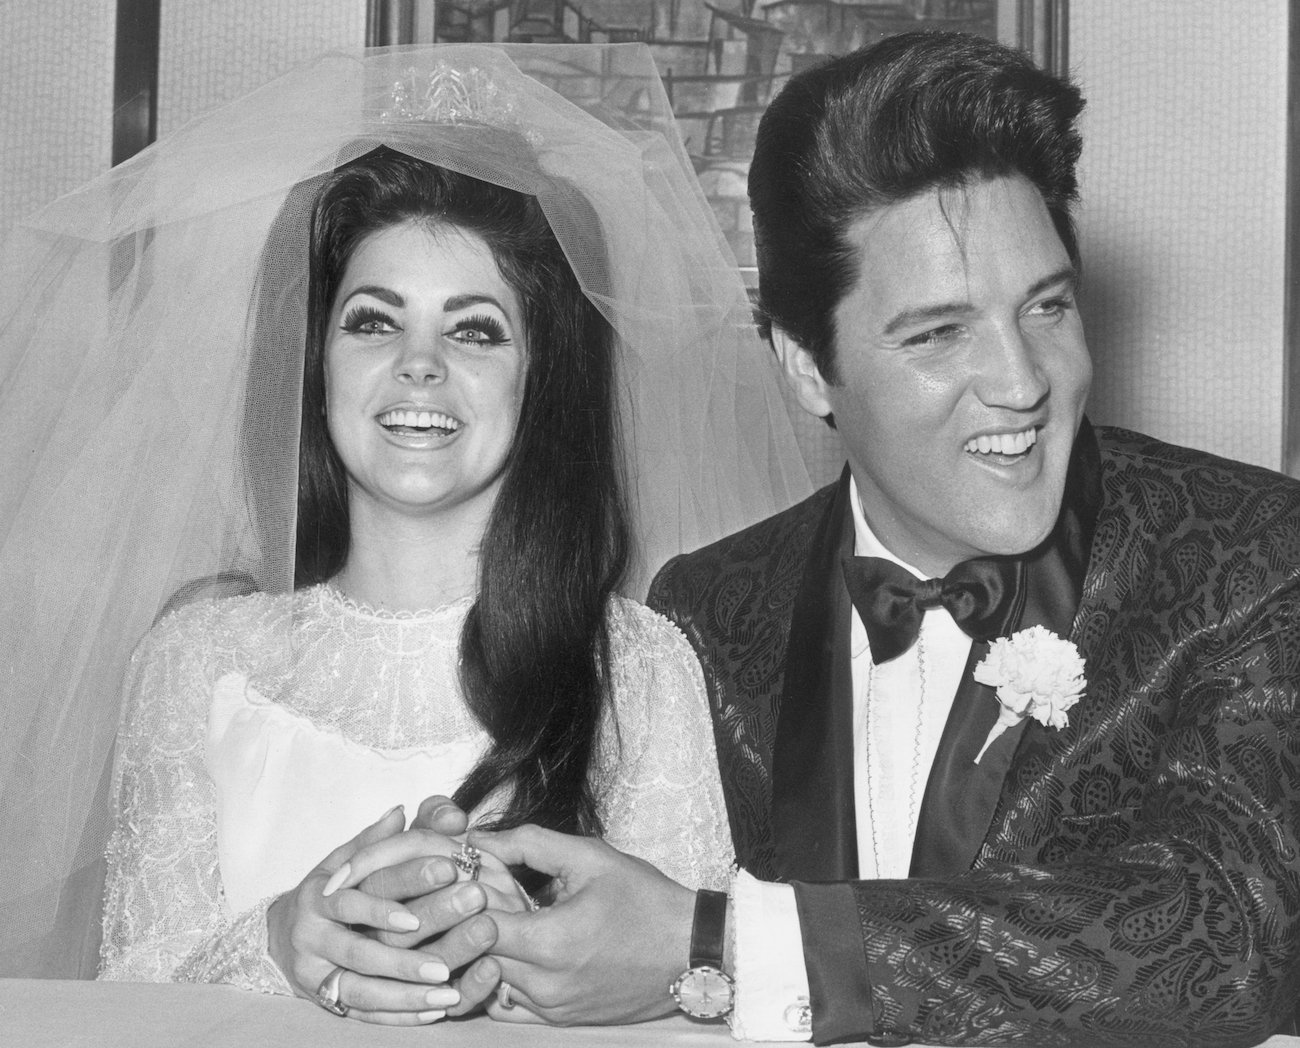 Elvis Presley Asked This TV Star for Advice When He Was Dating His Future Wife Priscilla Beaulieu